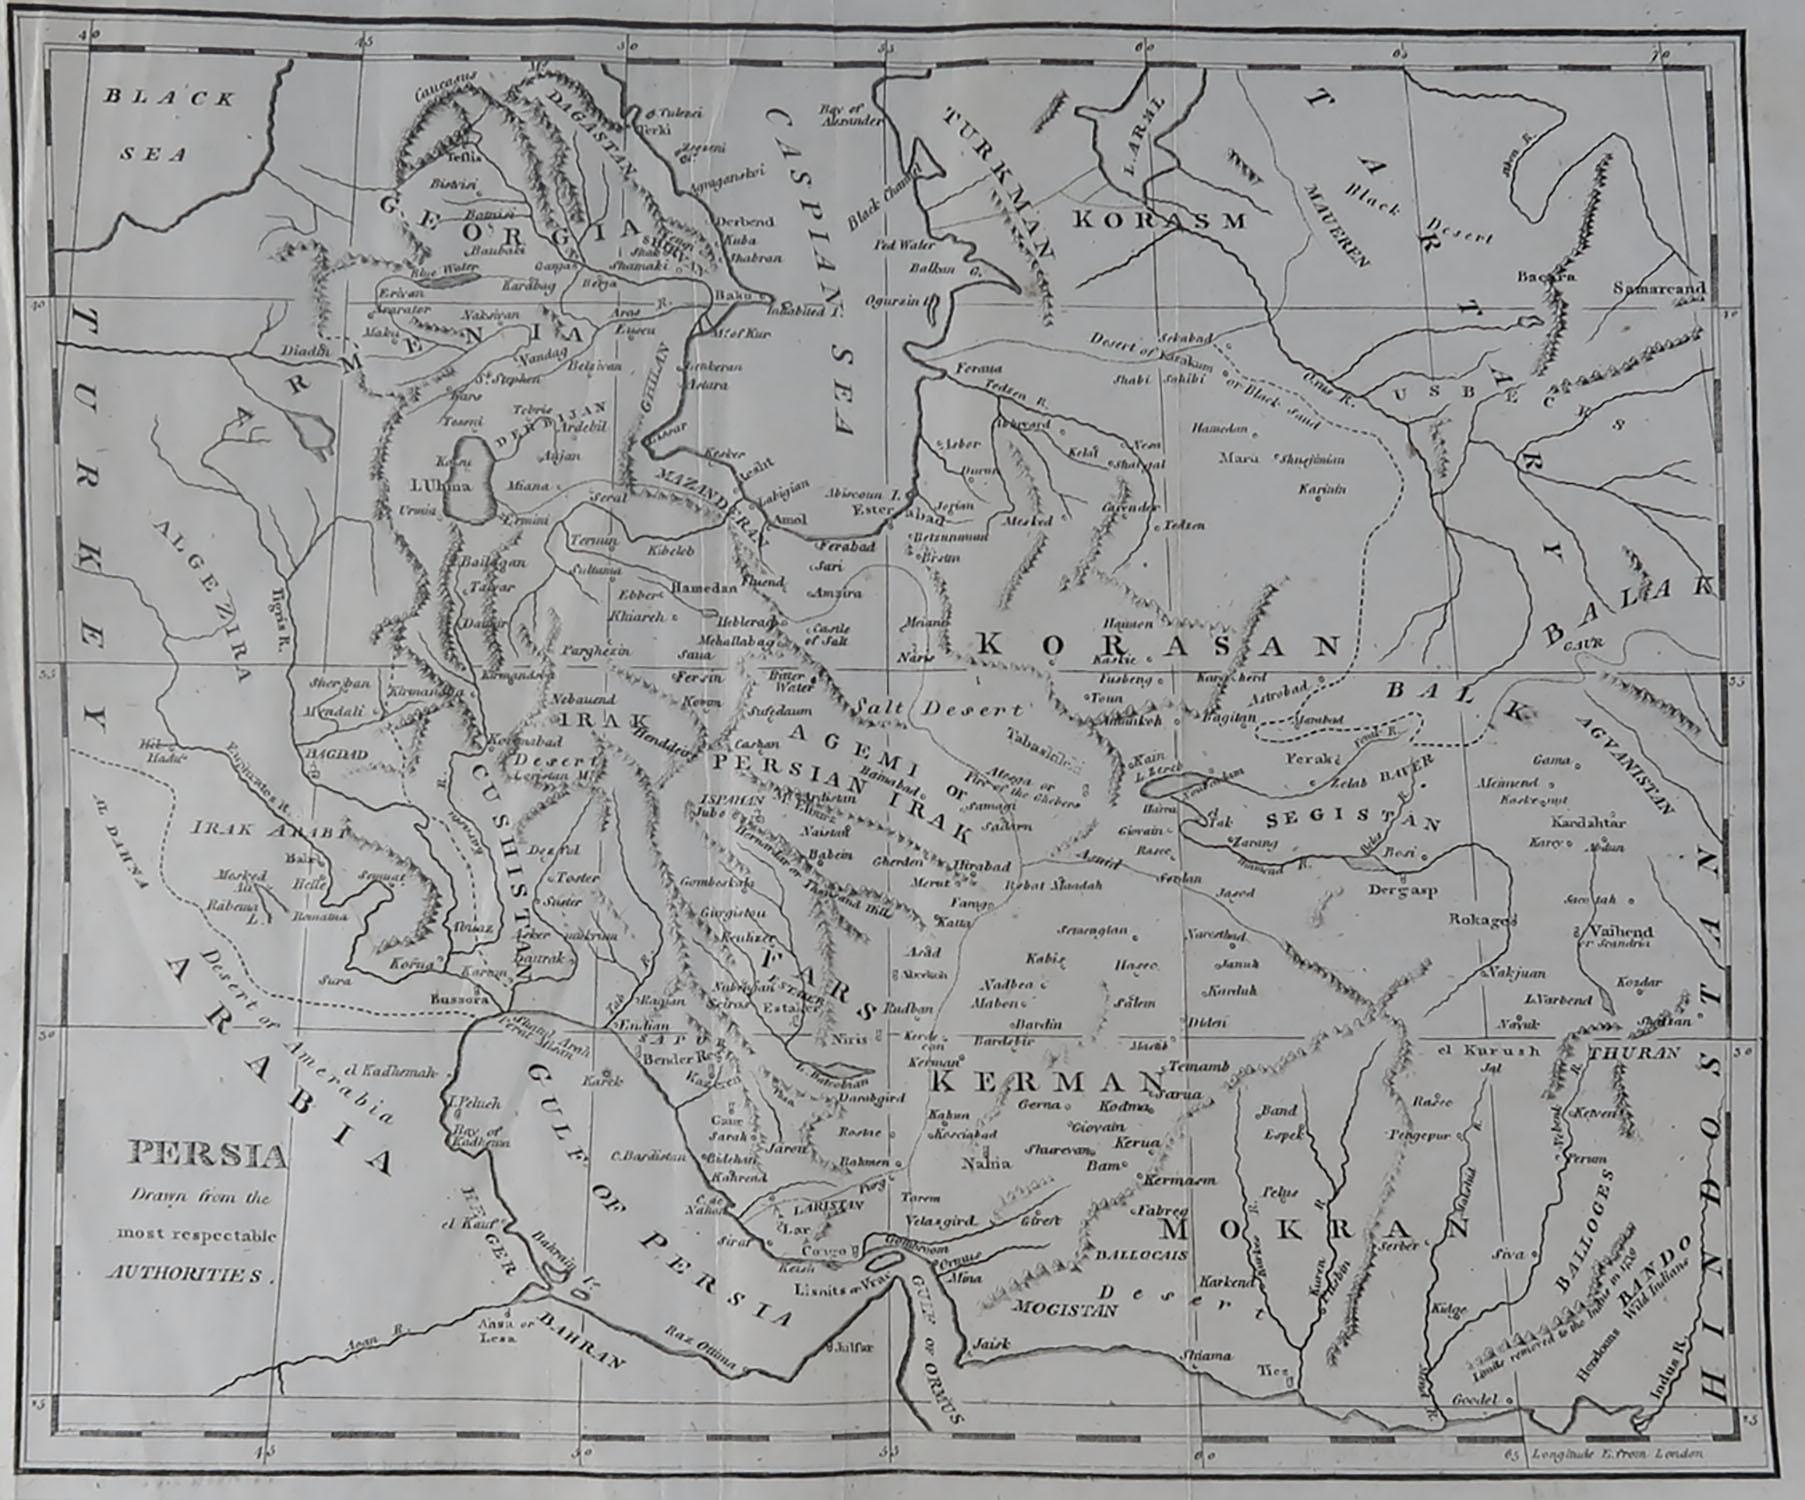 Super map of Persia

Copper plate engraving 

Published, circa 1820.

Unframed.

Some minor creasing.

   